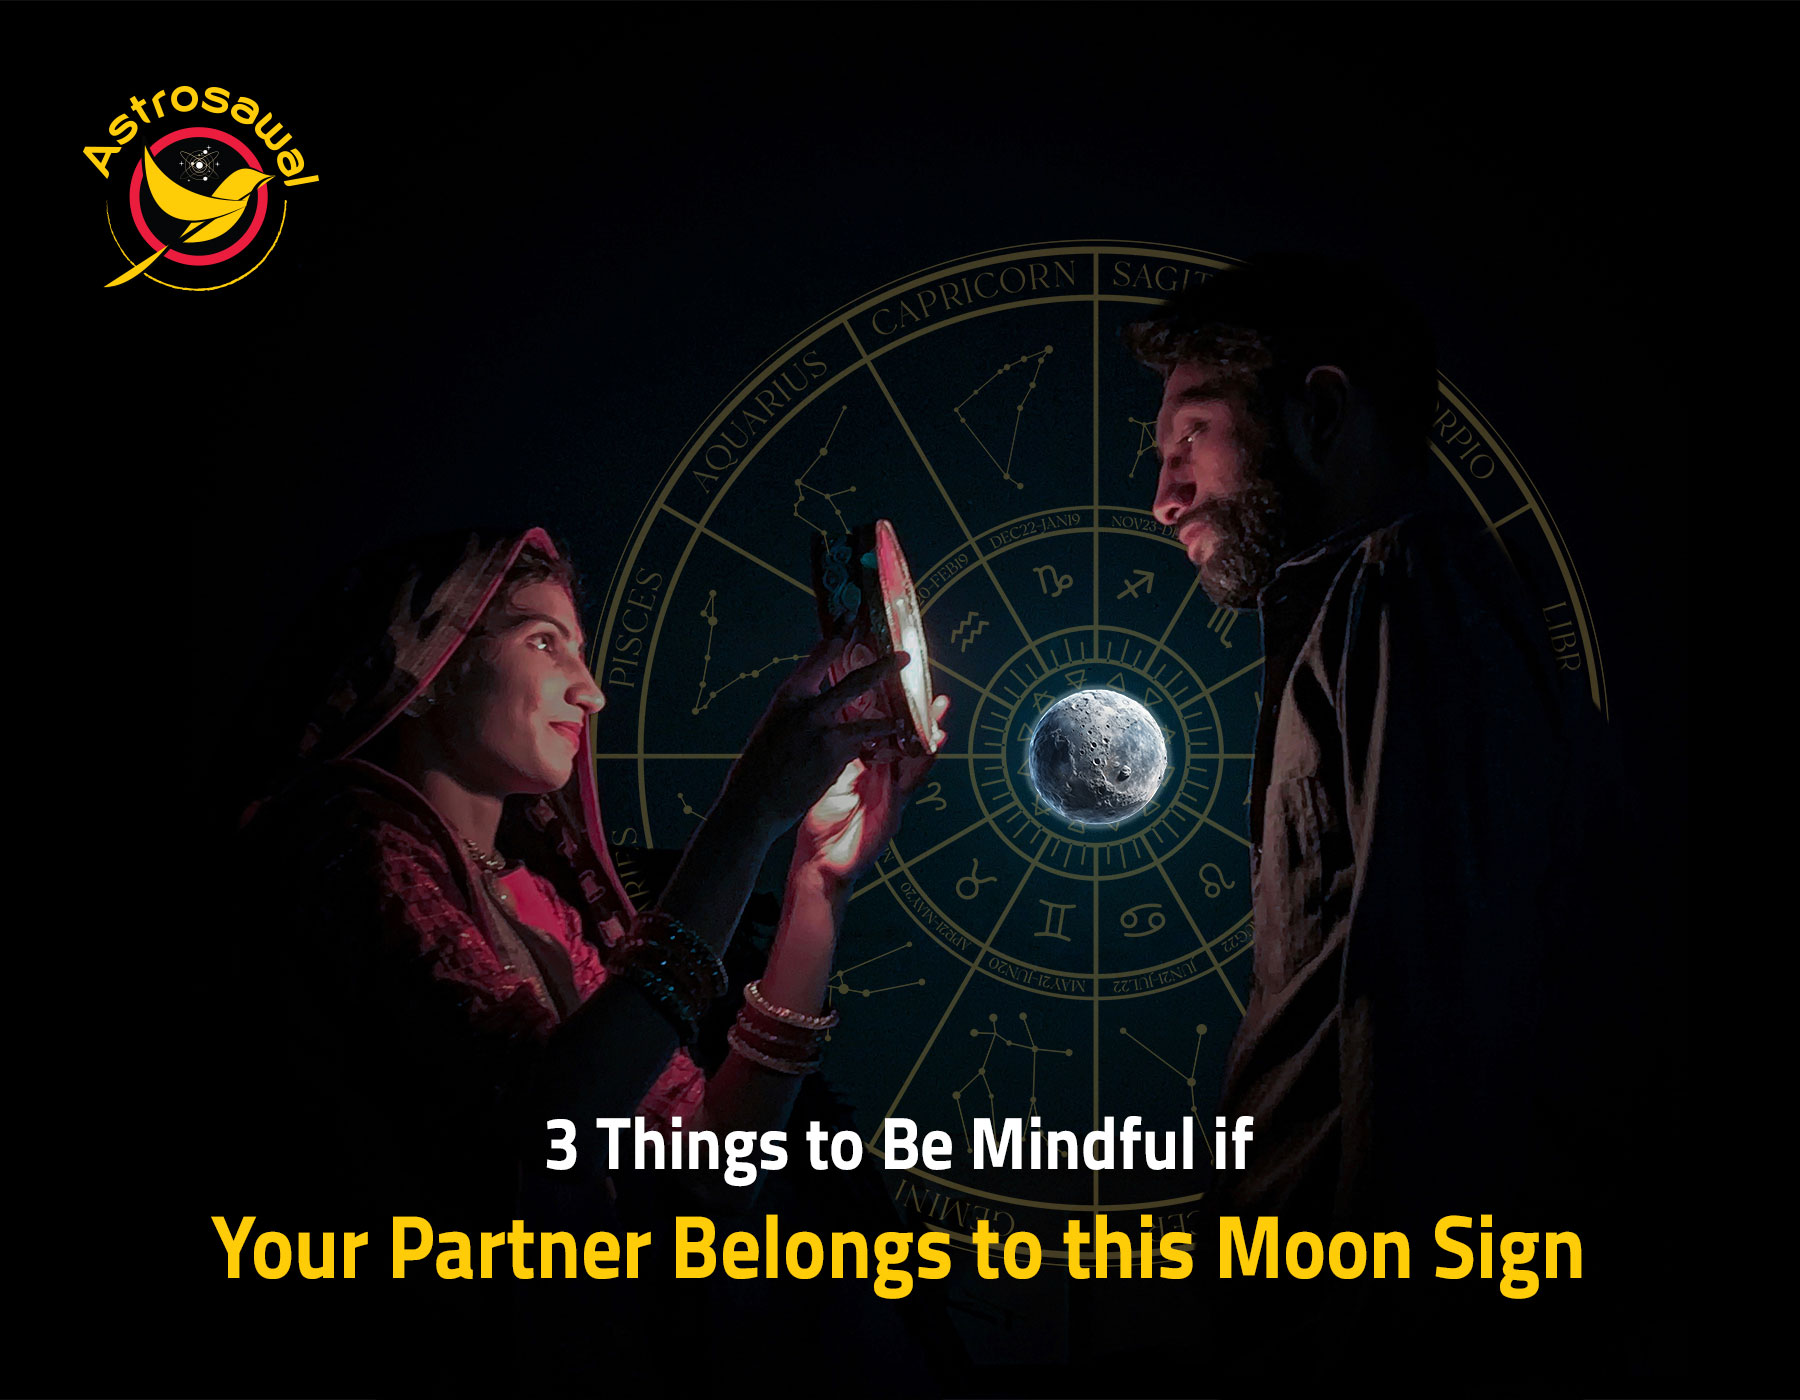 3 Things to Be Mindful If Your Partner Belongs to this Moon Sign